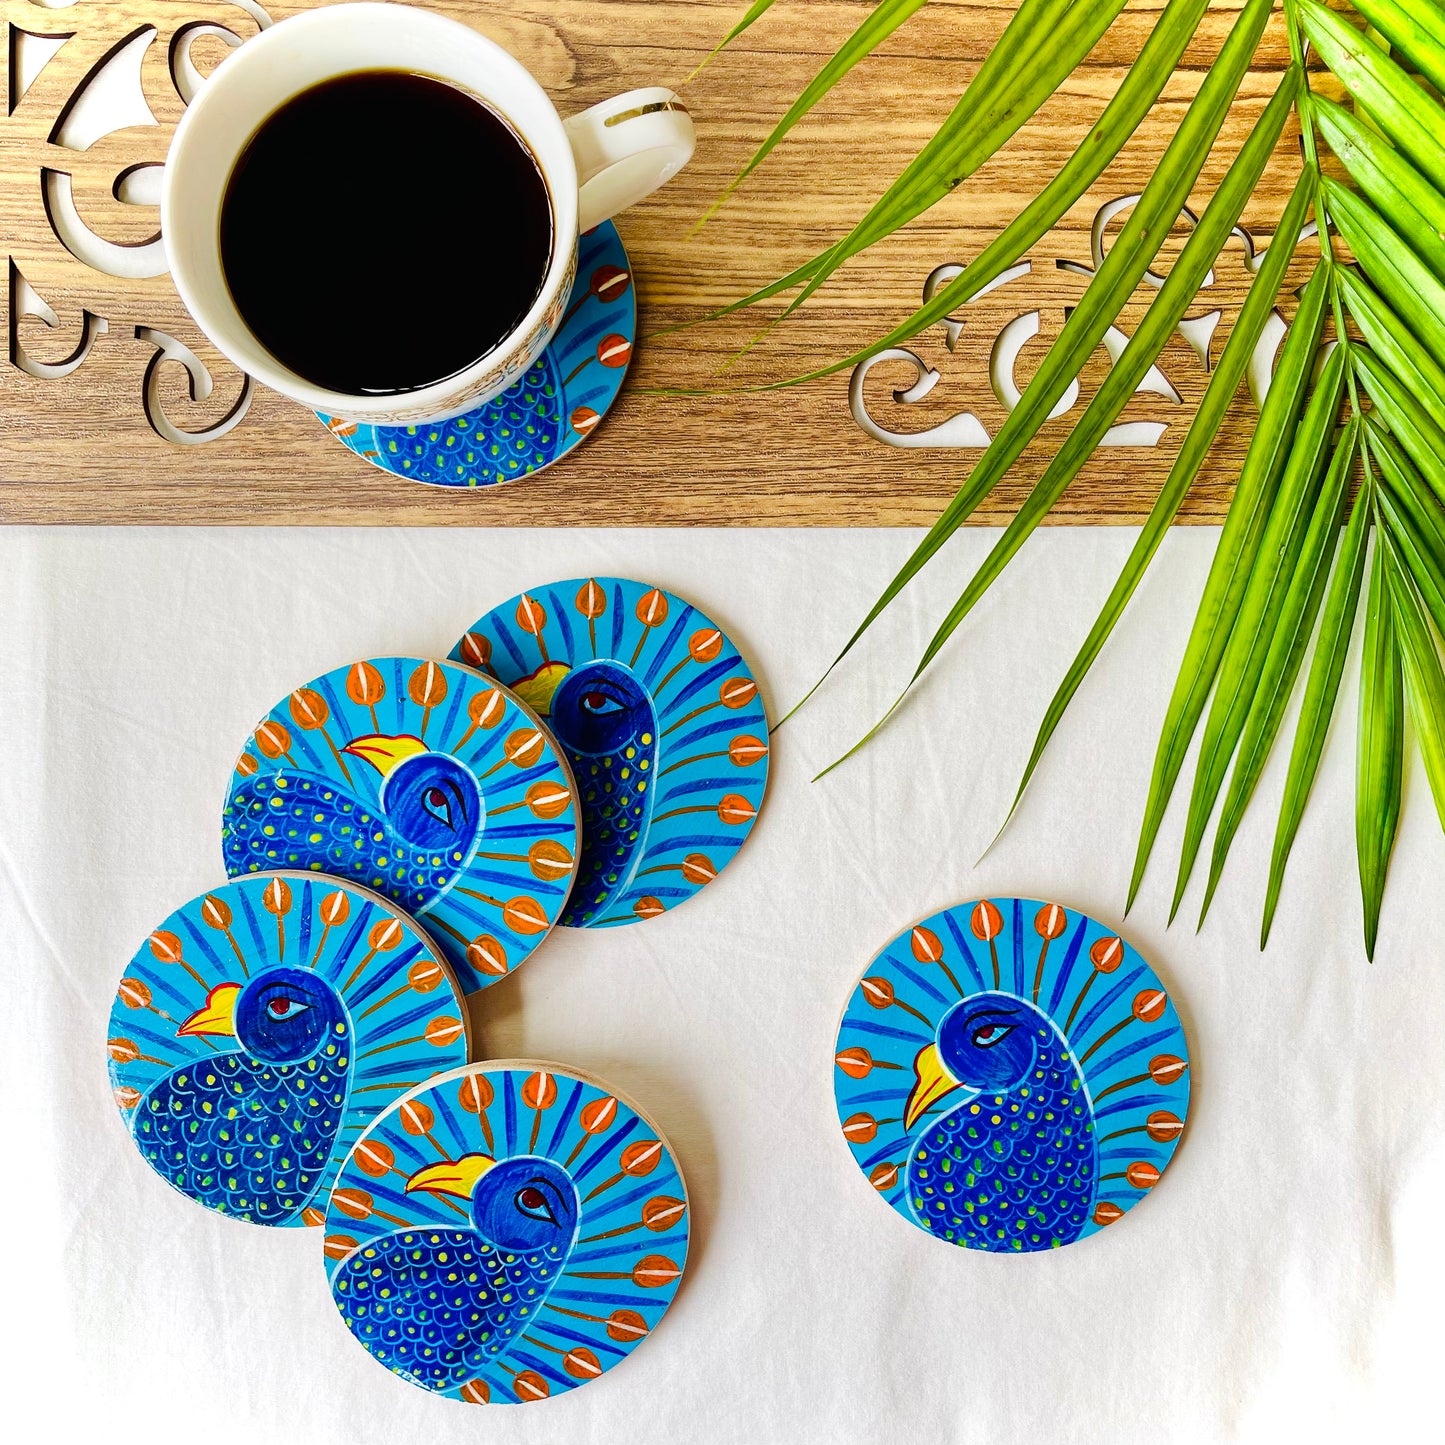 Five pure mango wood round wood coasters painted with peacocks having blue bodies, red feathers and yellow beaks are placed near a teacup filled with black tea with leaves in the background